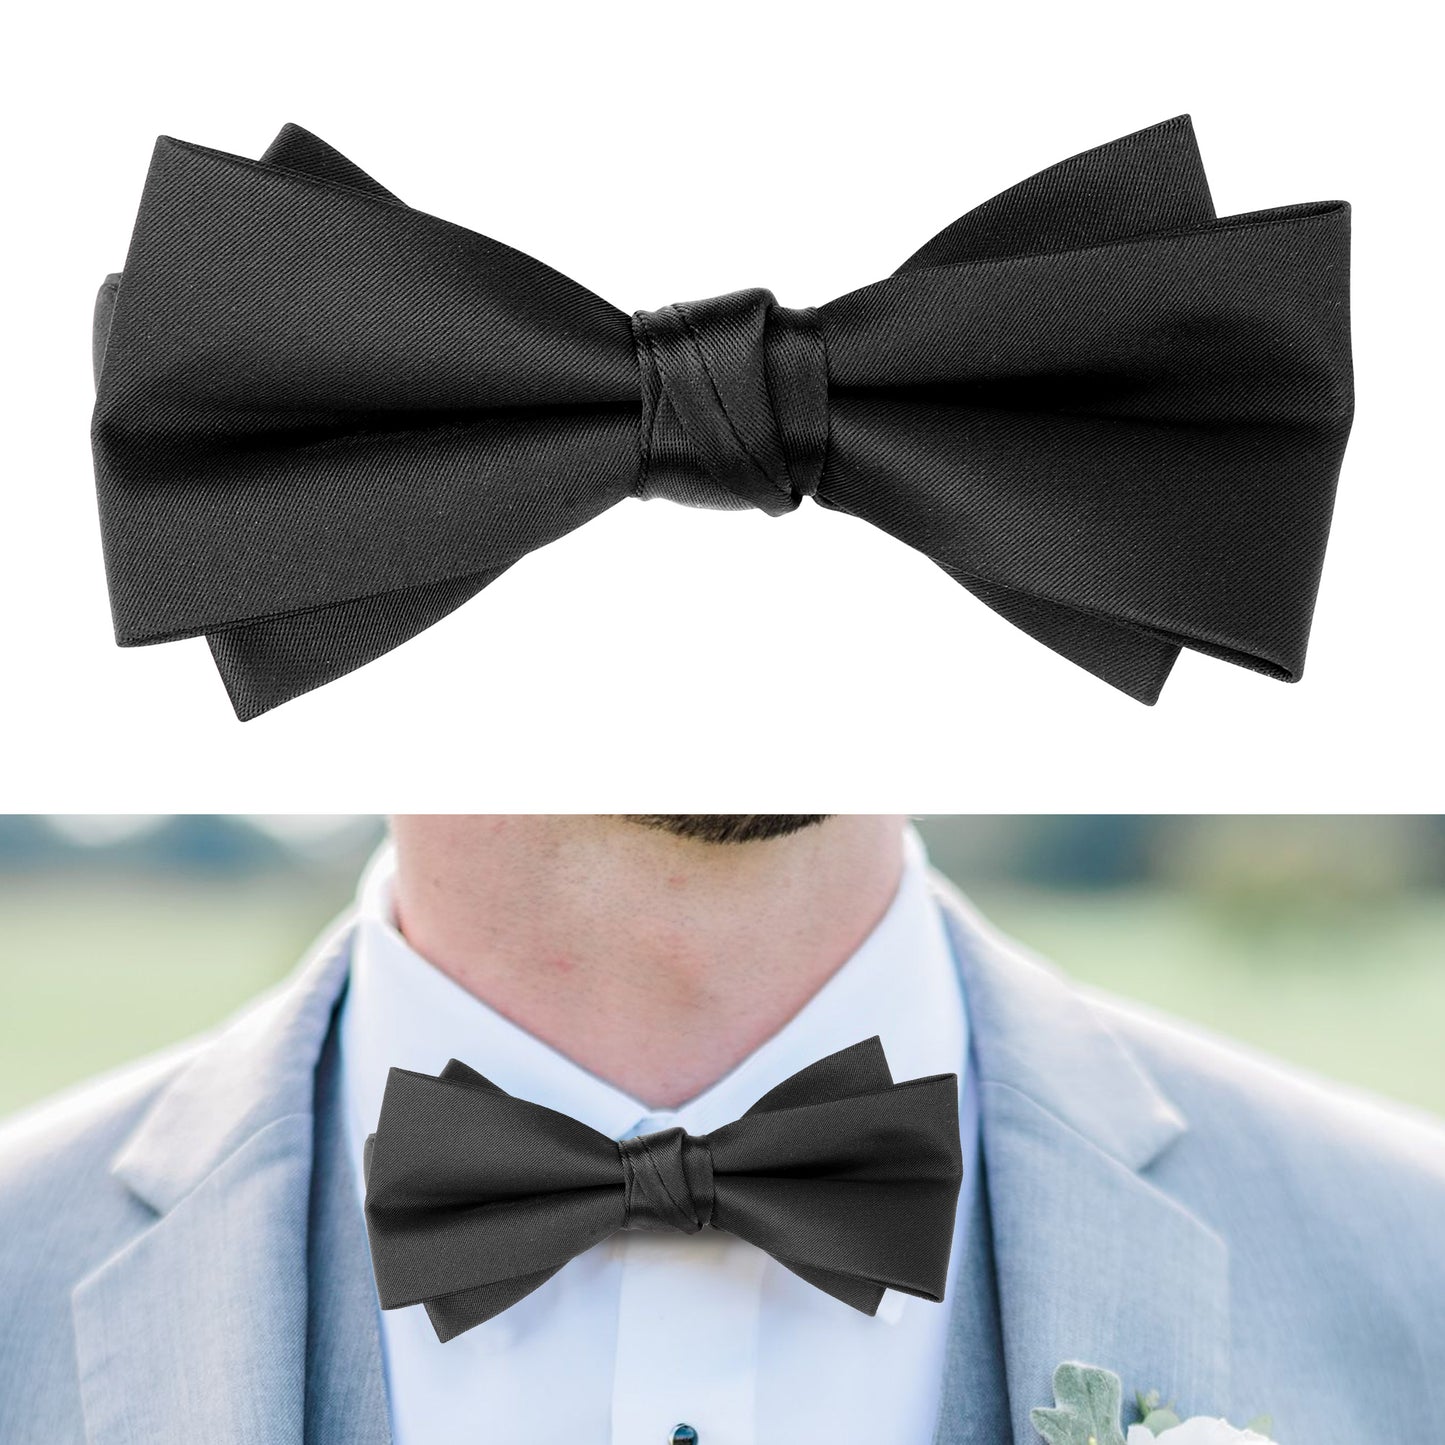 Classic Bow Tie Set - Black Silk Bow Tie with Gift Box for Men and Boys